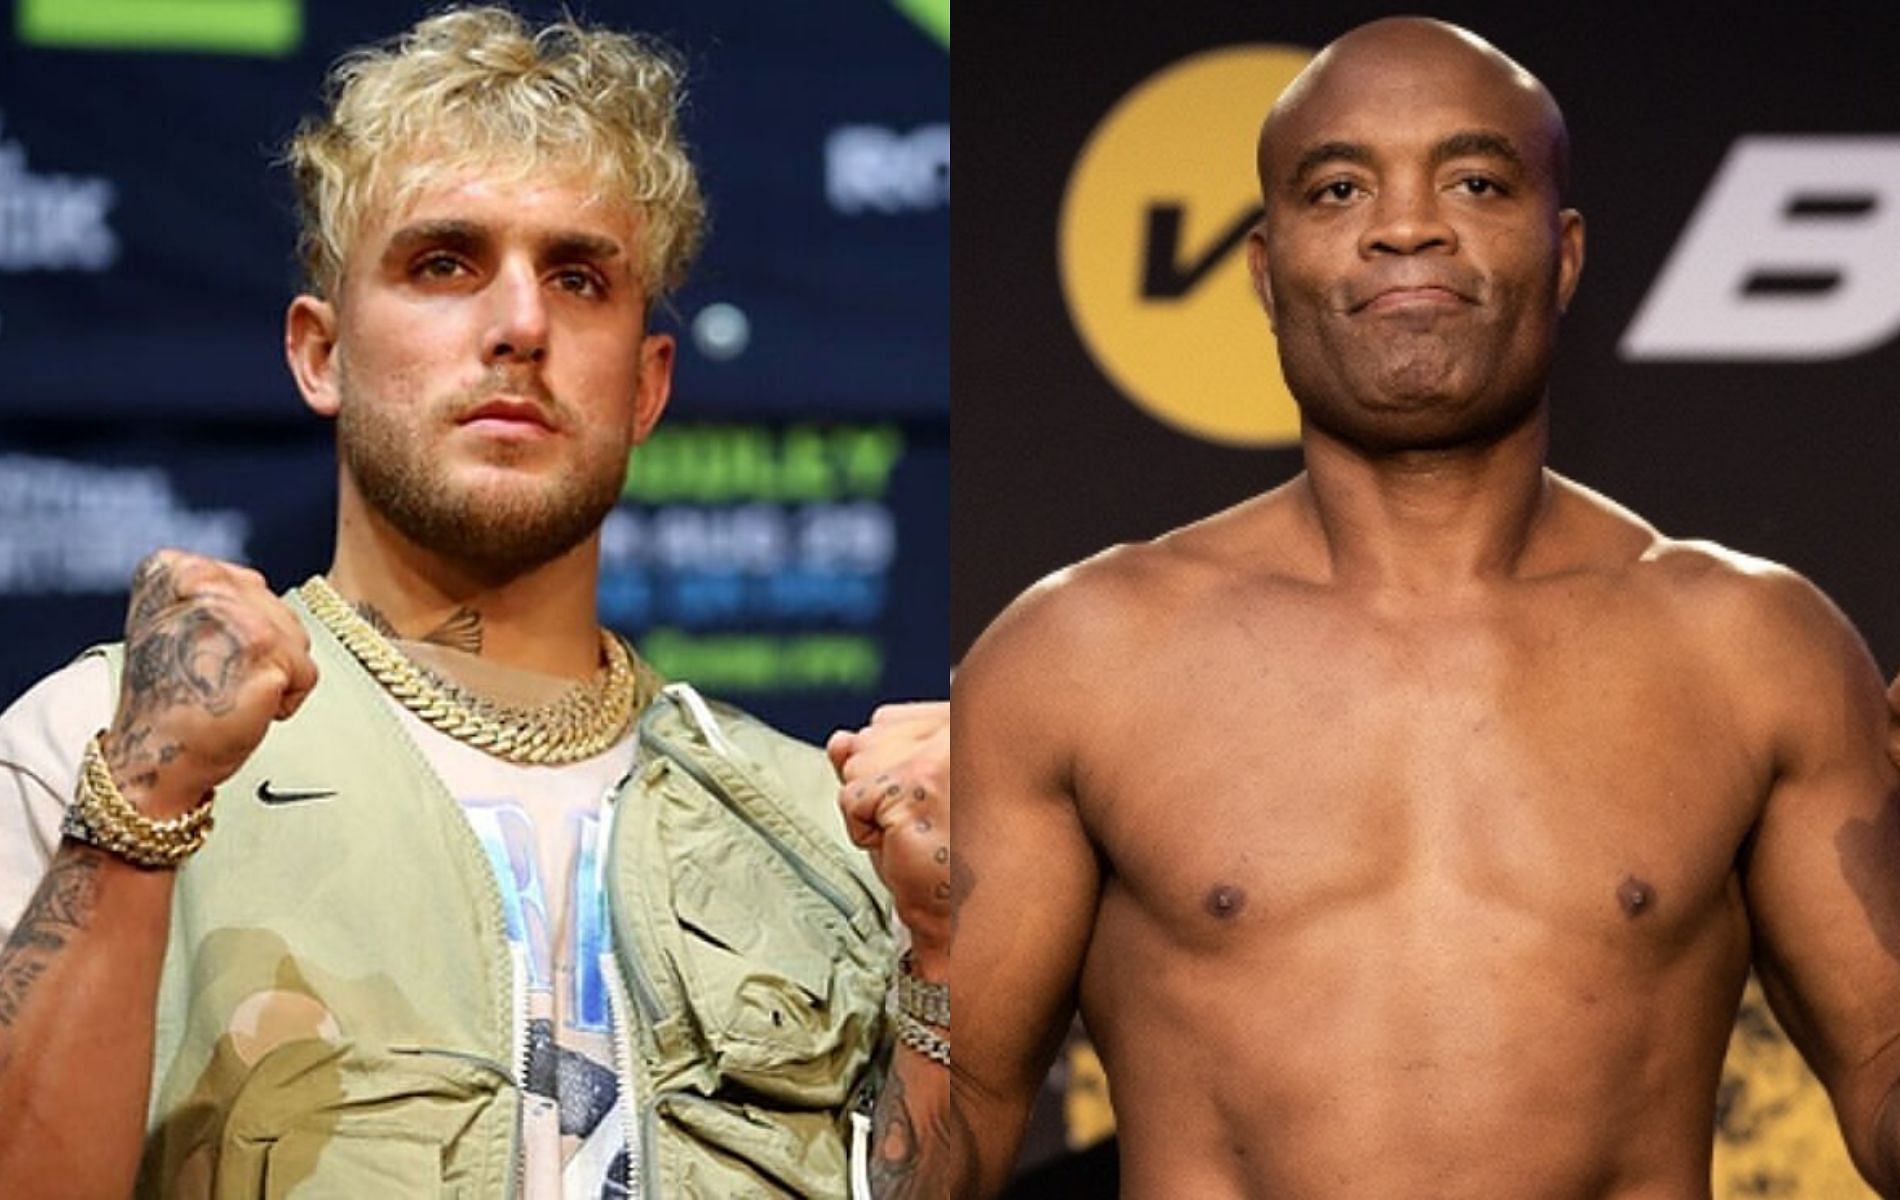 jake-paul-vs-anderson-silva-height-weight-and-boxing-record-comparison